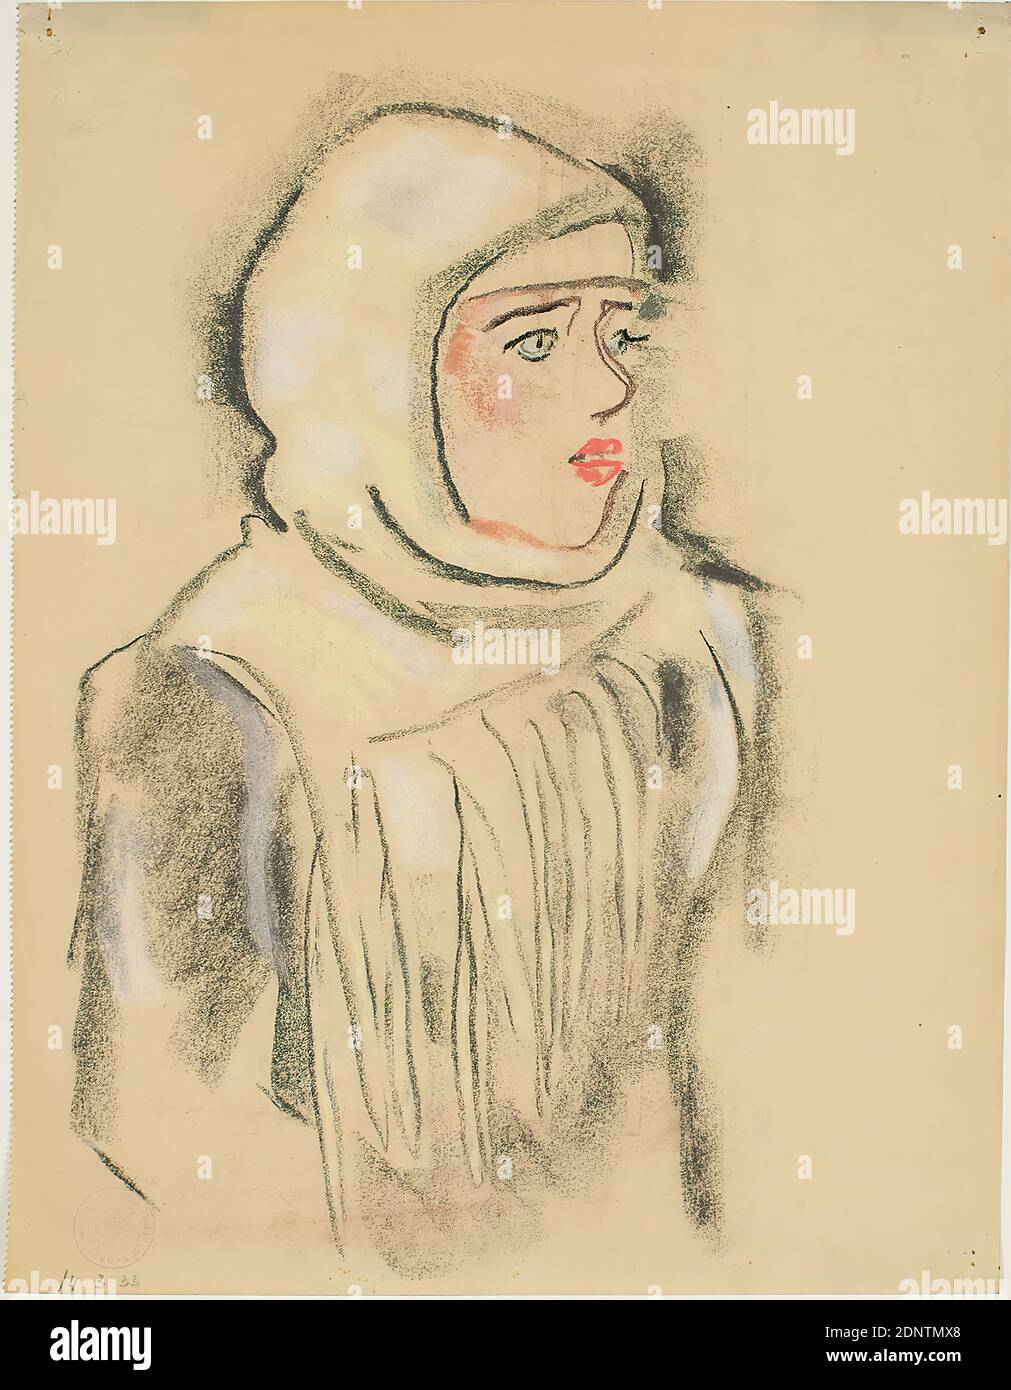 Gustav Heinrich Wolff, Russian girl, drawing paper, pastel chalk, drawing, pastel on drawing paper, Total: Height: 33.1 cm; Width: 25.4 cm, dated: recto bottom left: with charcoal: 14 3 33, drawing, graphics, sketches, portrait, young woman, girl, half-figure portrait, headdress, Classic Modernism, portrait of a Russian girl with headscarf, single sheet from the Russian sketchbook Stock Photo